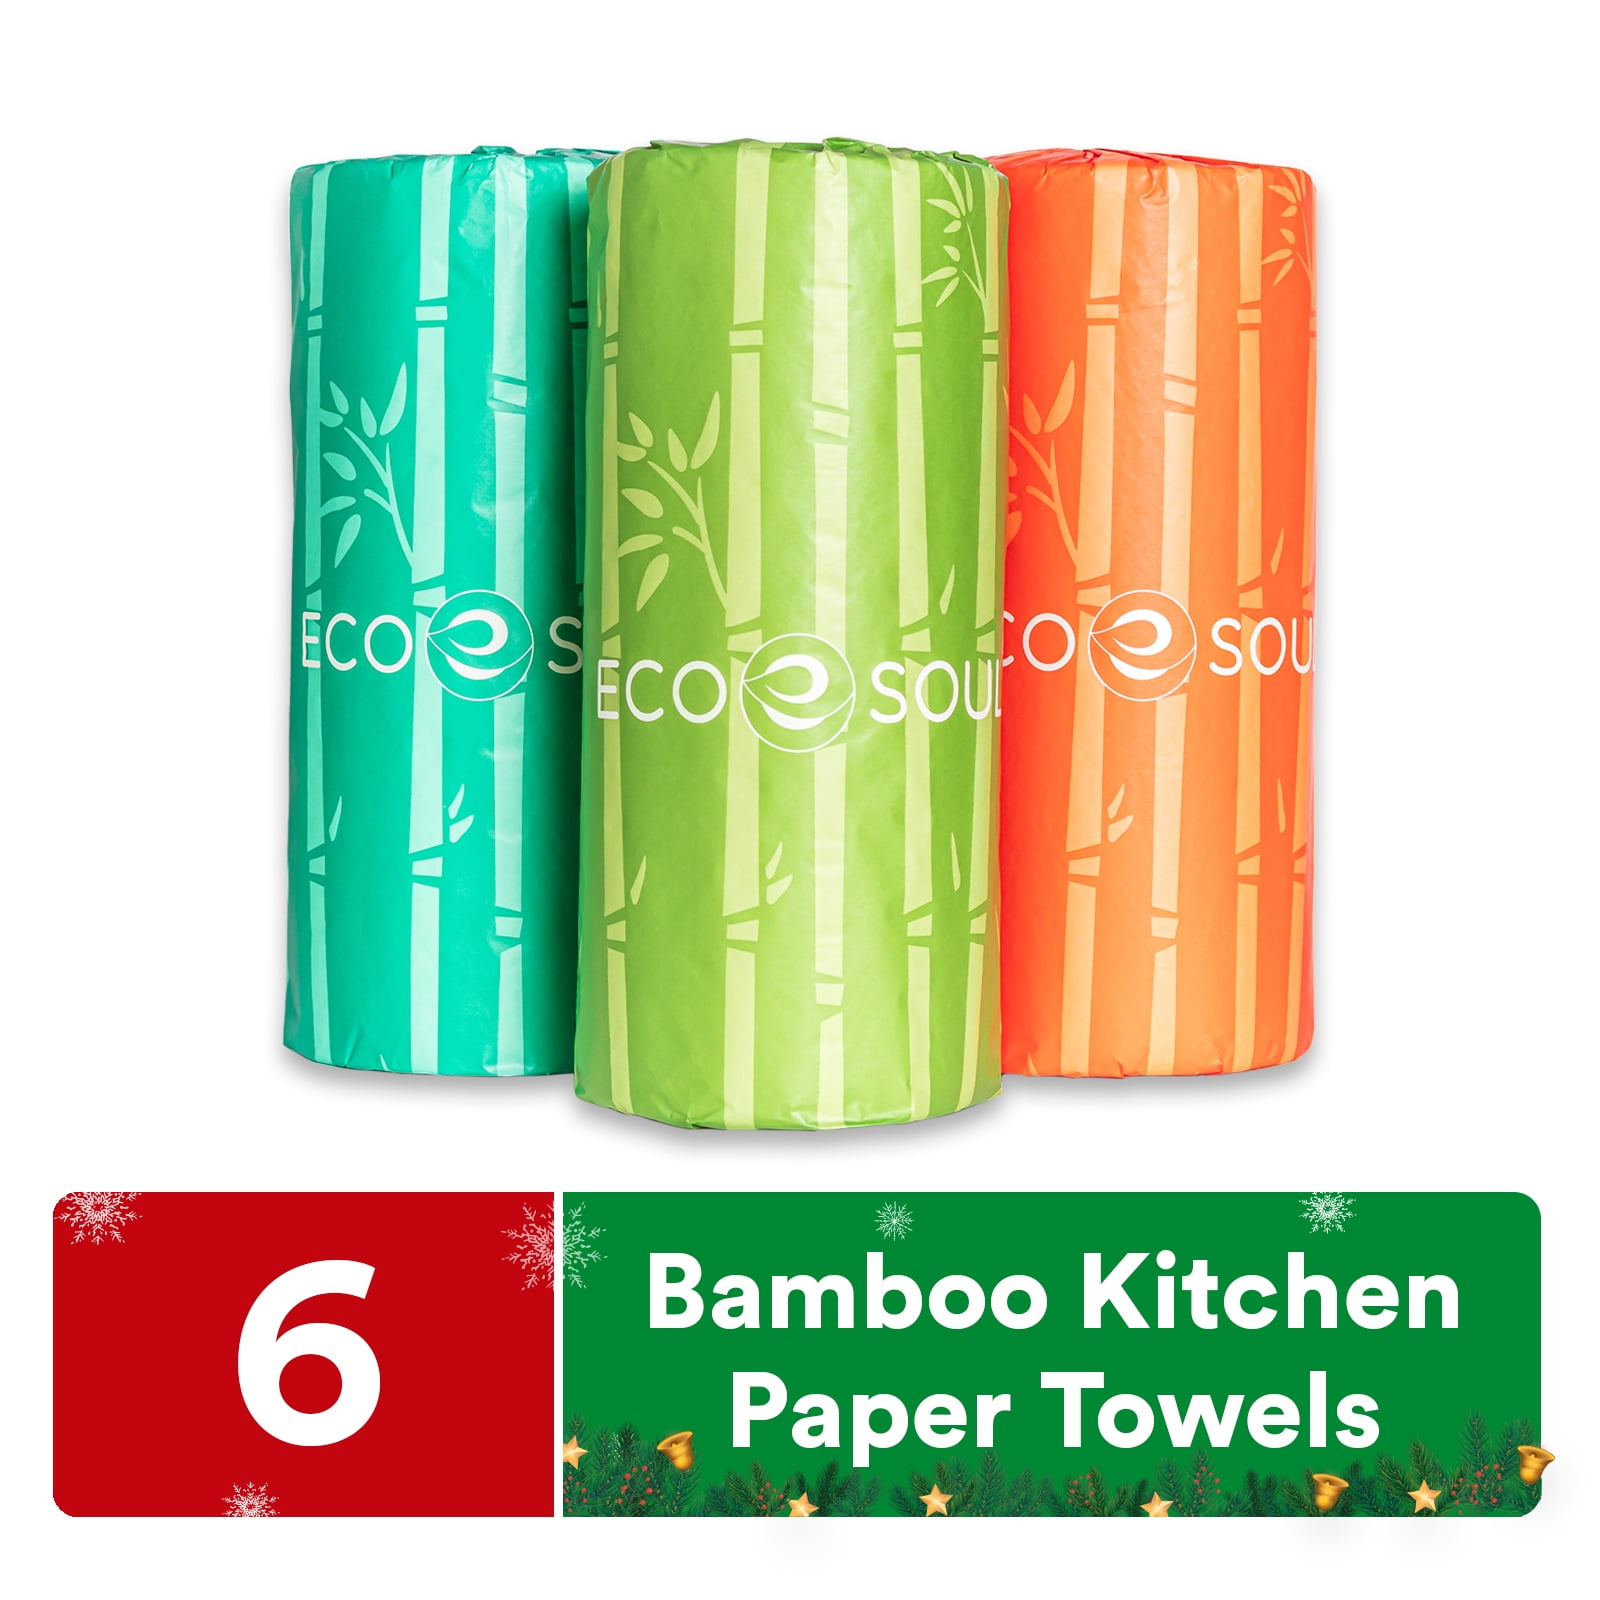 Reusable Paper Towel, Bamboo Eco Kitchen Roll